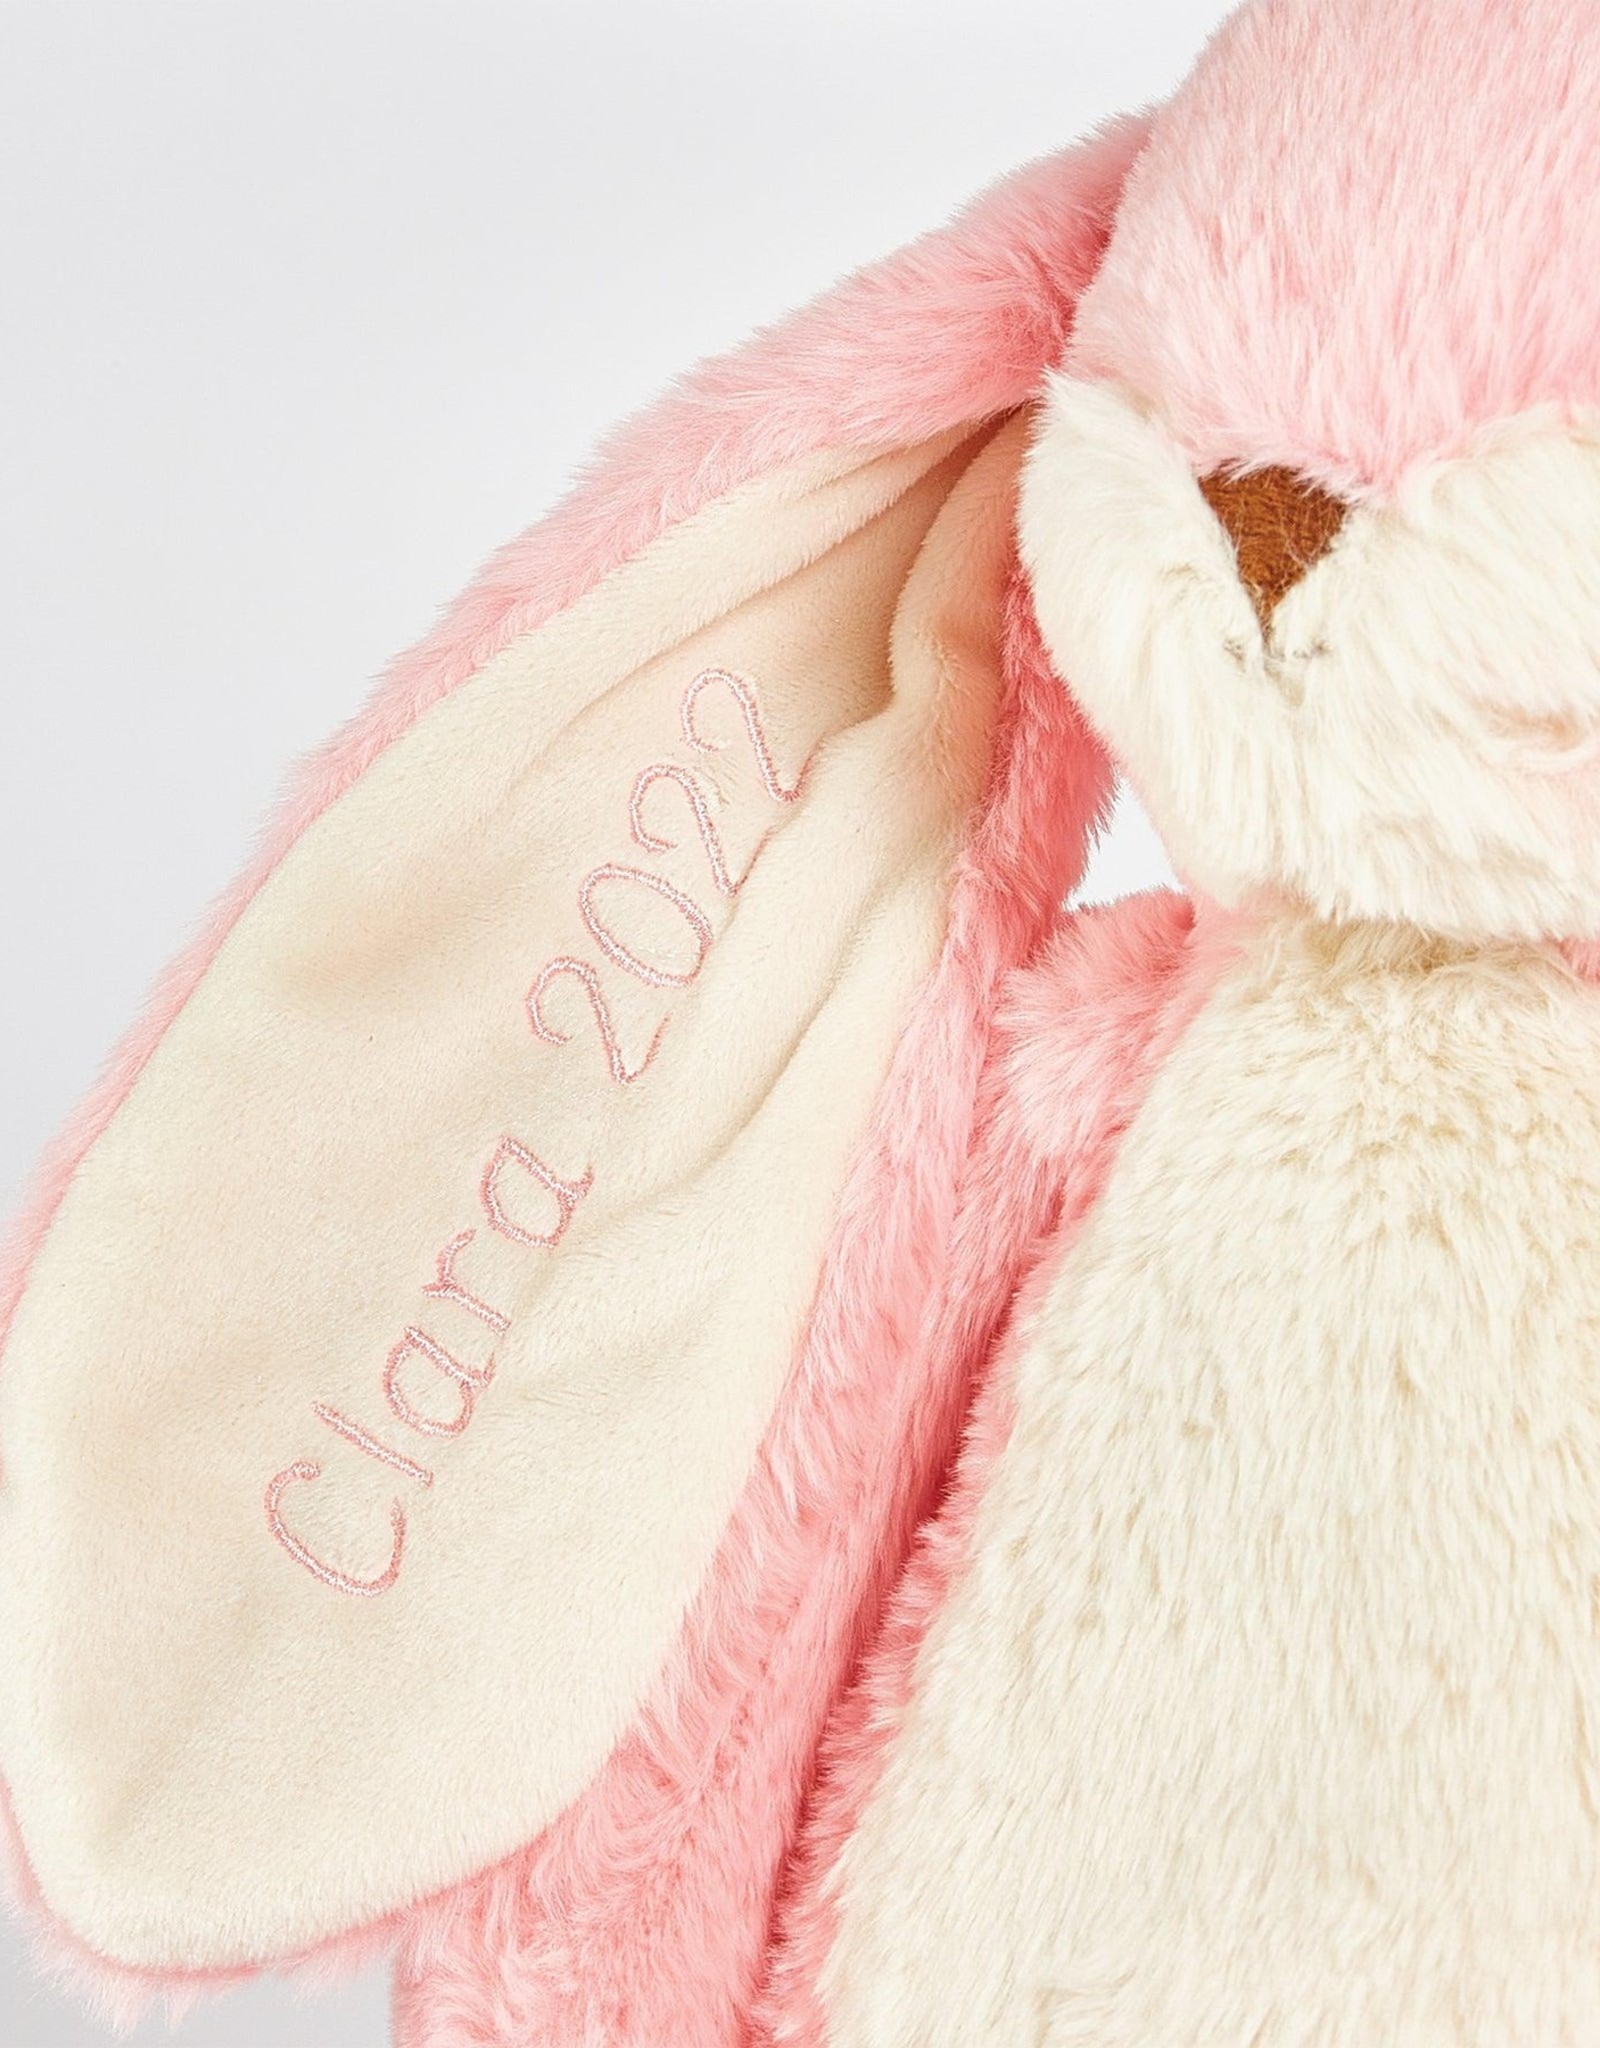 Bunnies By The Bay 104397 Sweet Nibble Floppy Bunny 16" Coral Blush